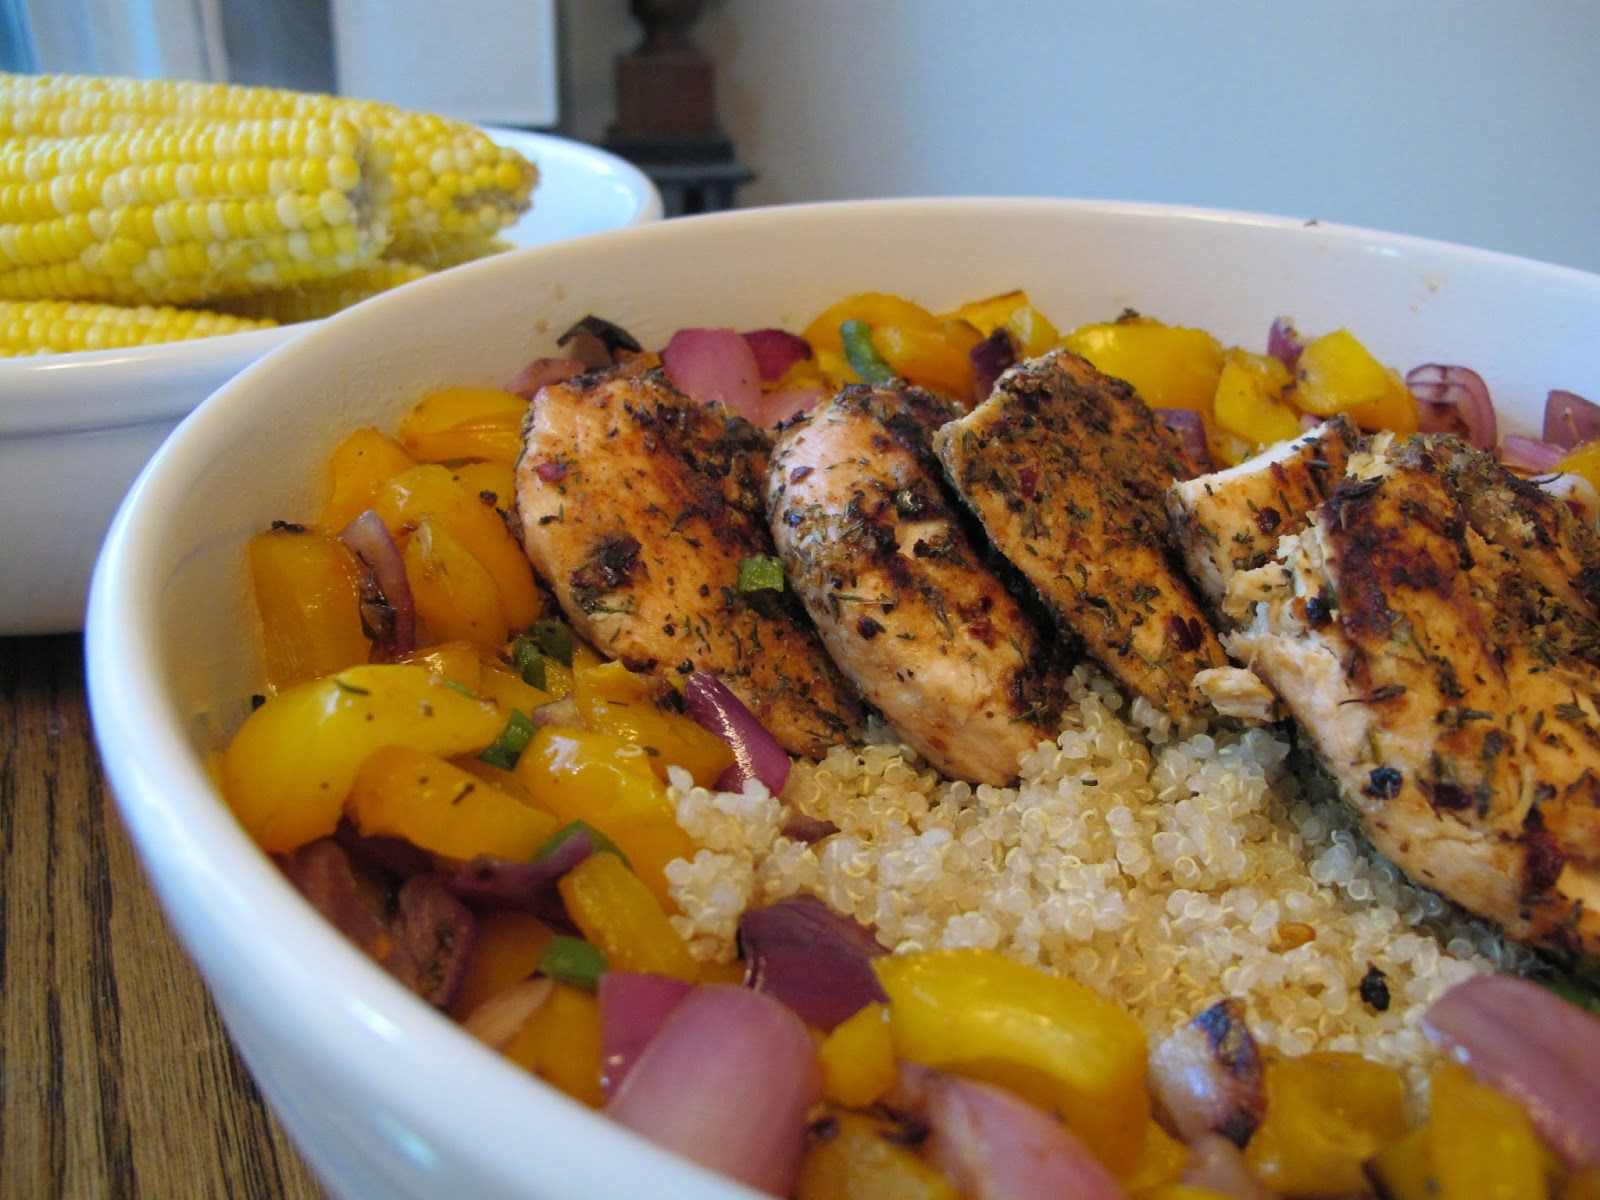 Weight Watchers Quinoa Recipes
 Grilled Cajun Seasoned Chicken and Peppers on Quinoa